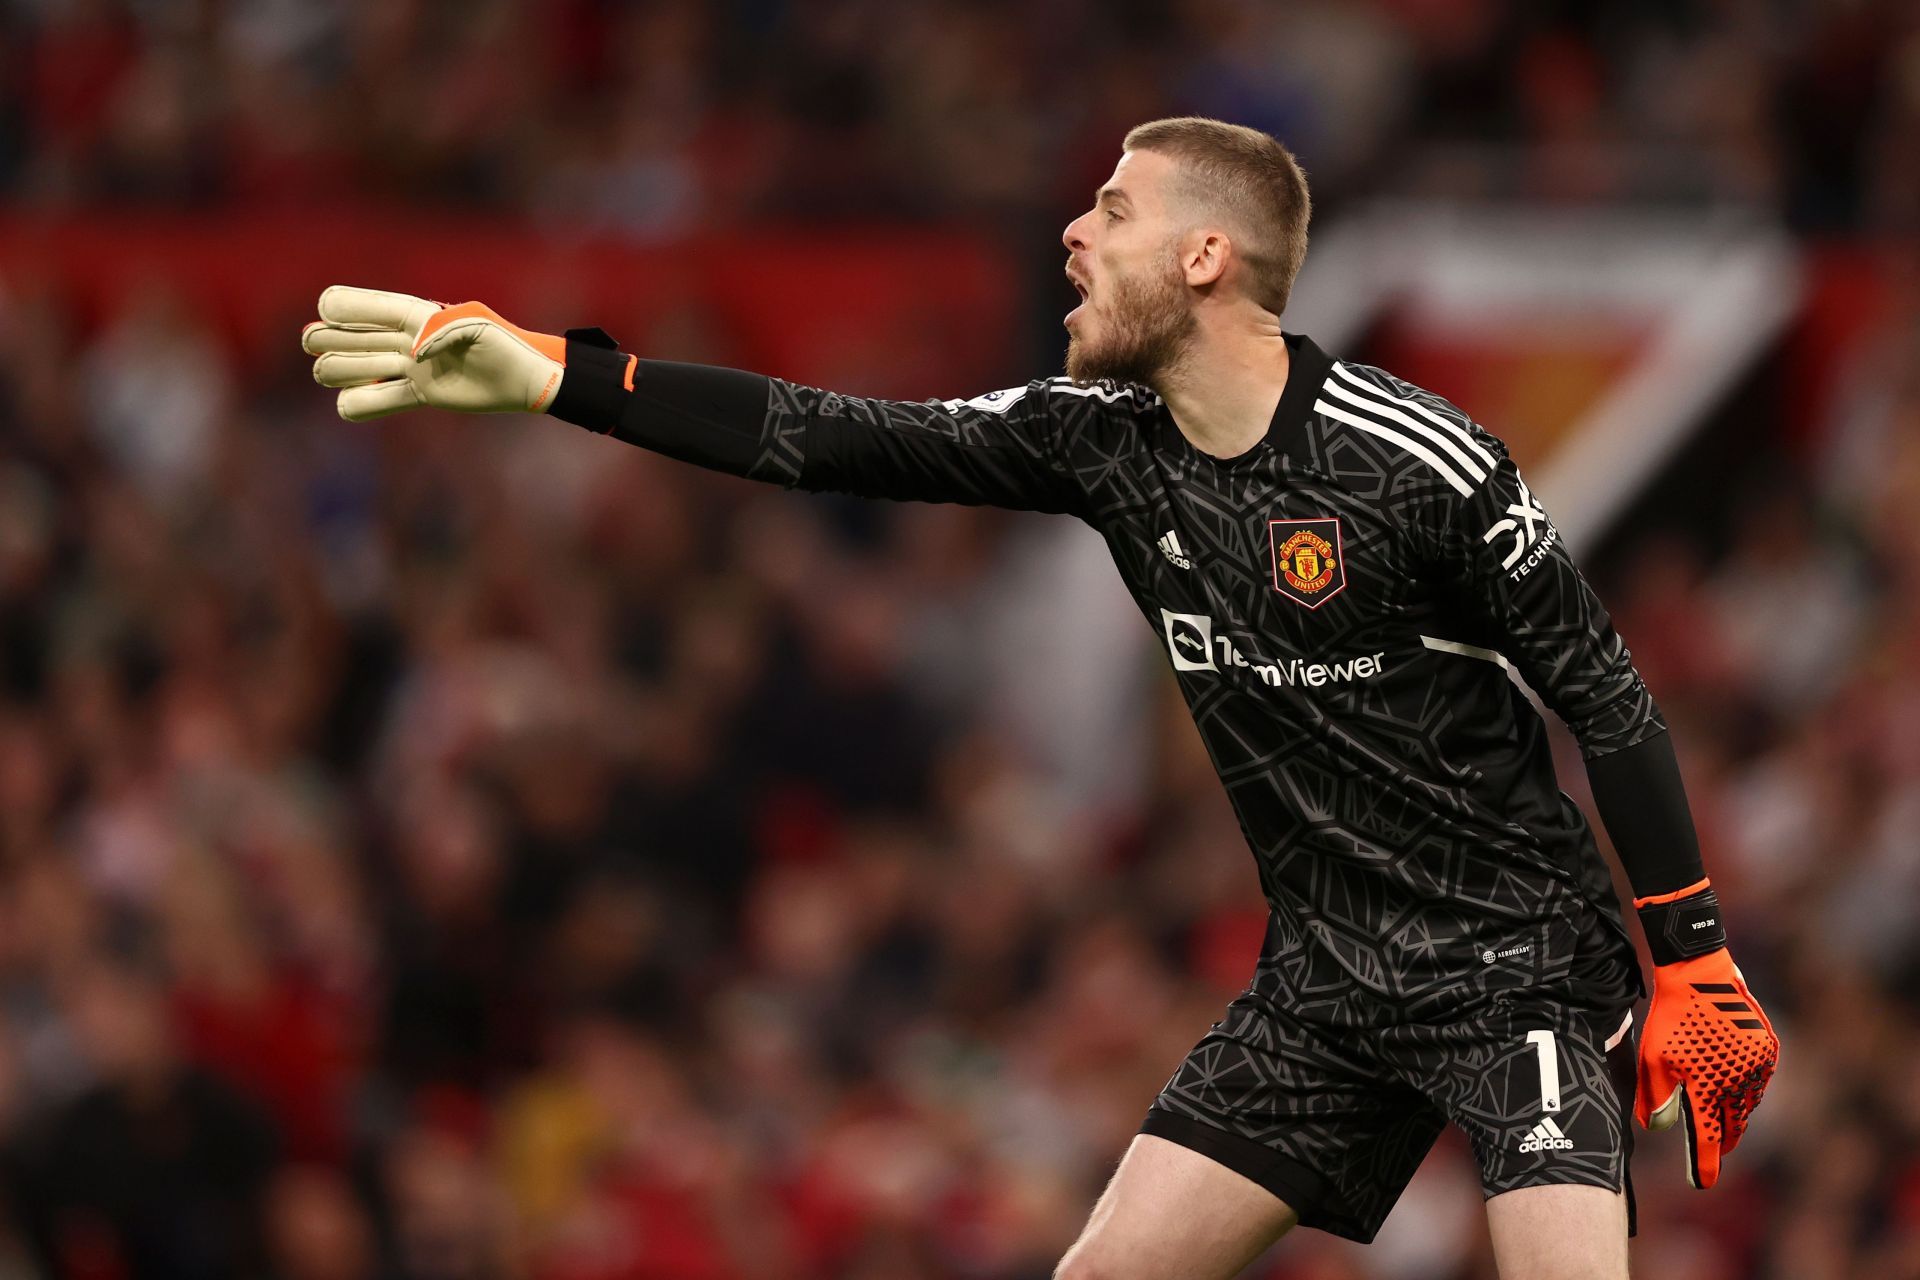 De Gea is taking his time over his future after leaving Manchester United.